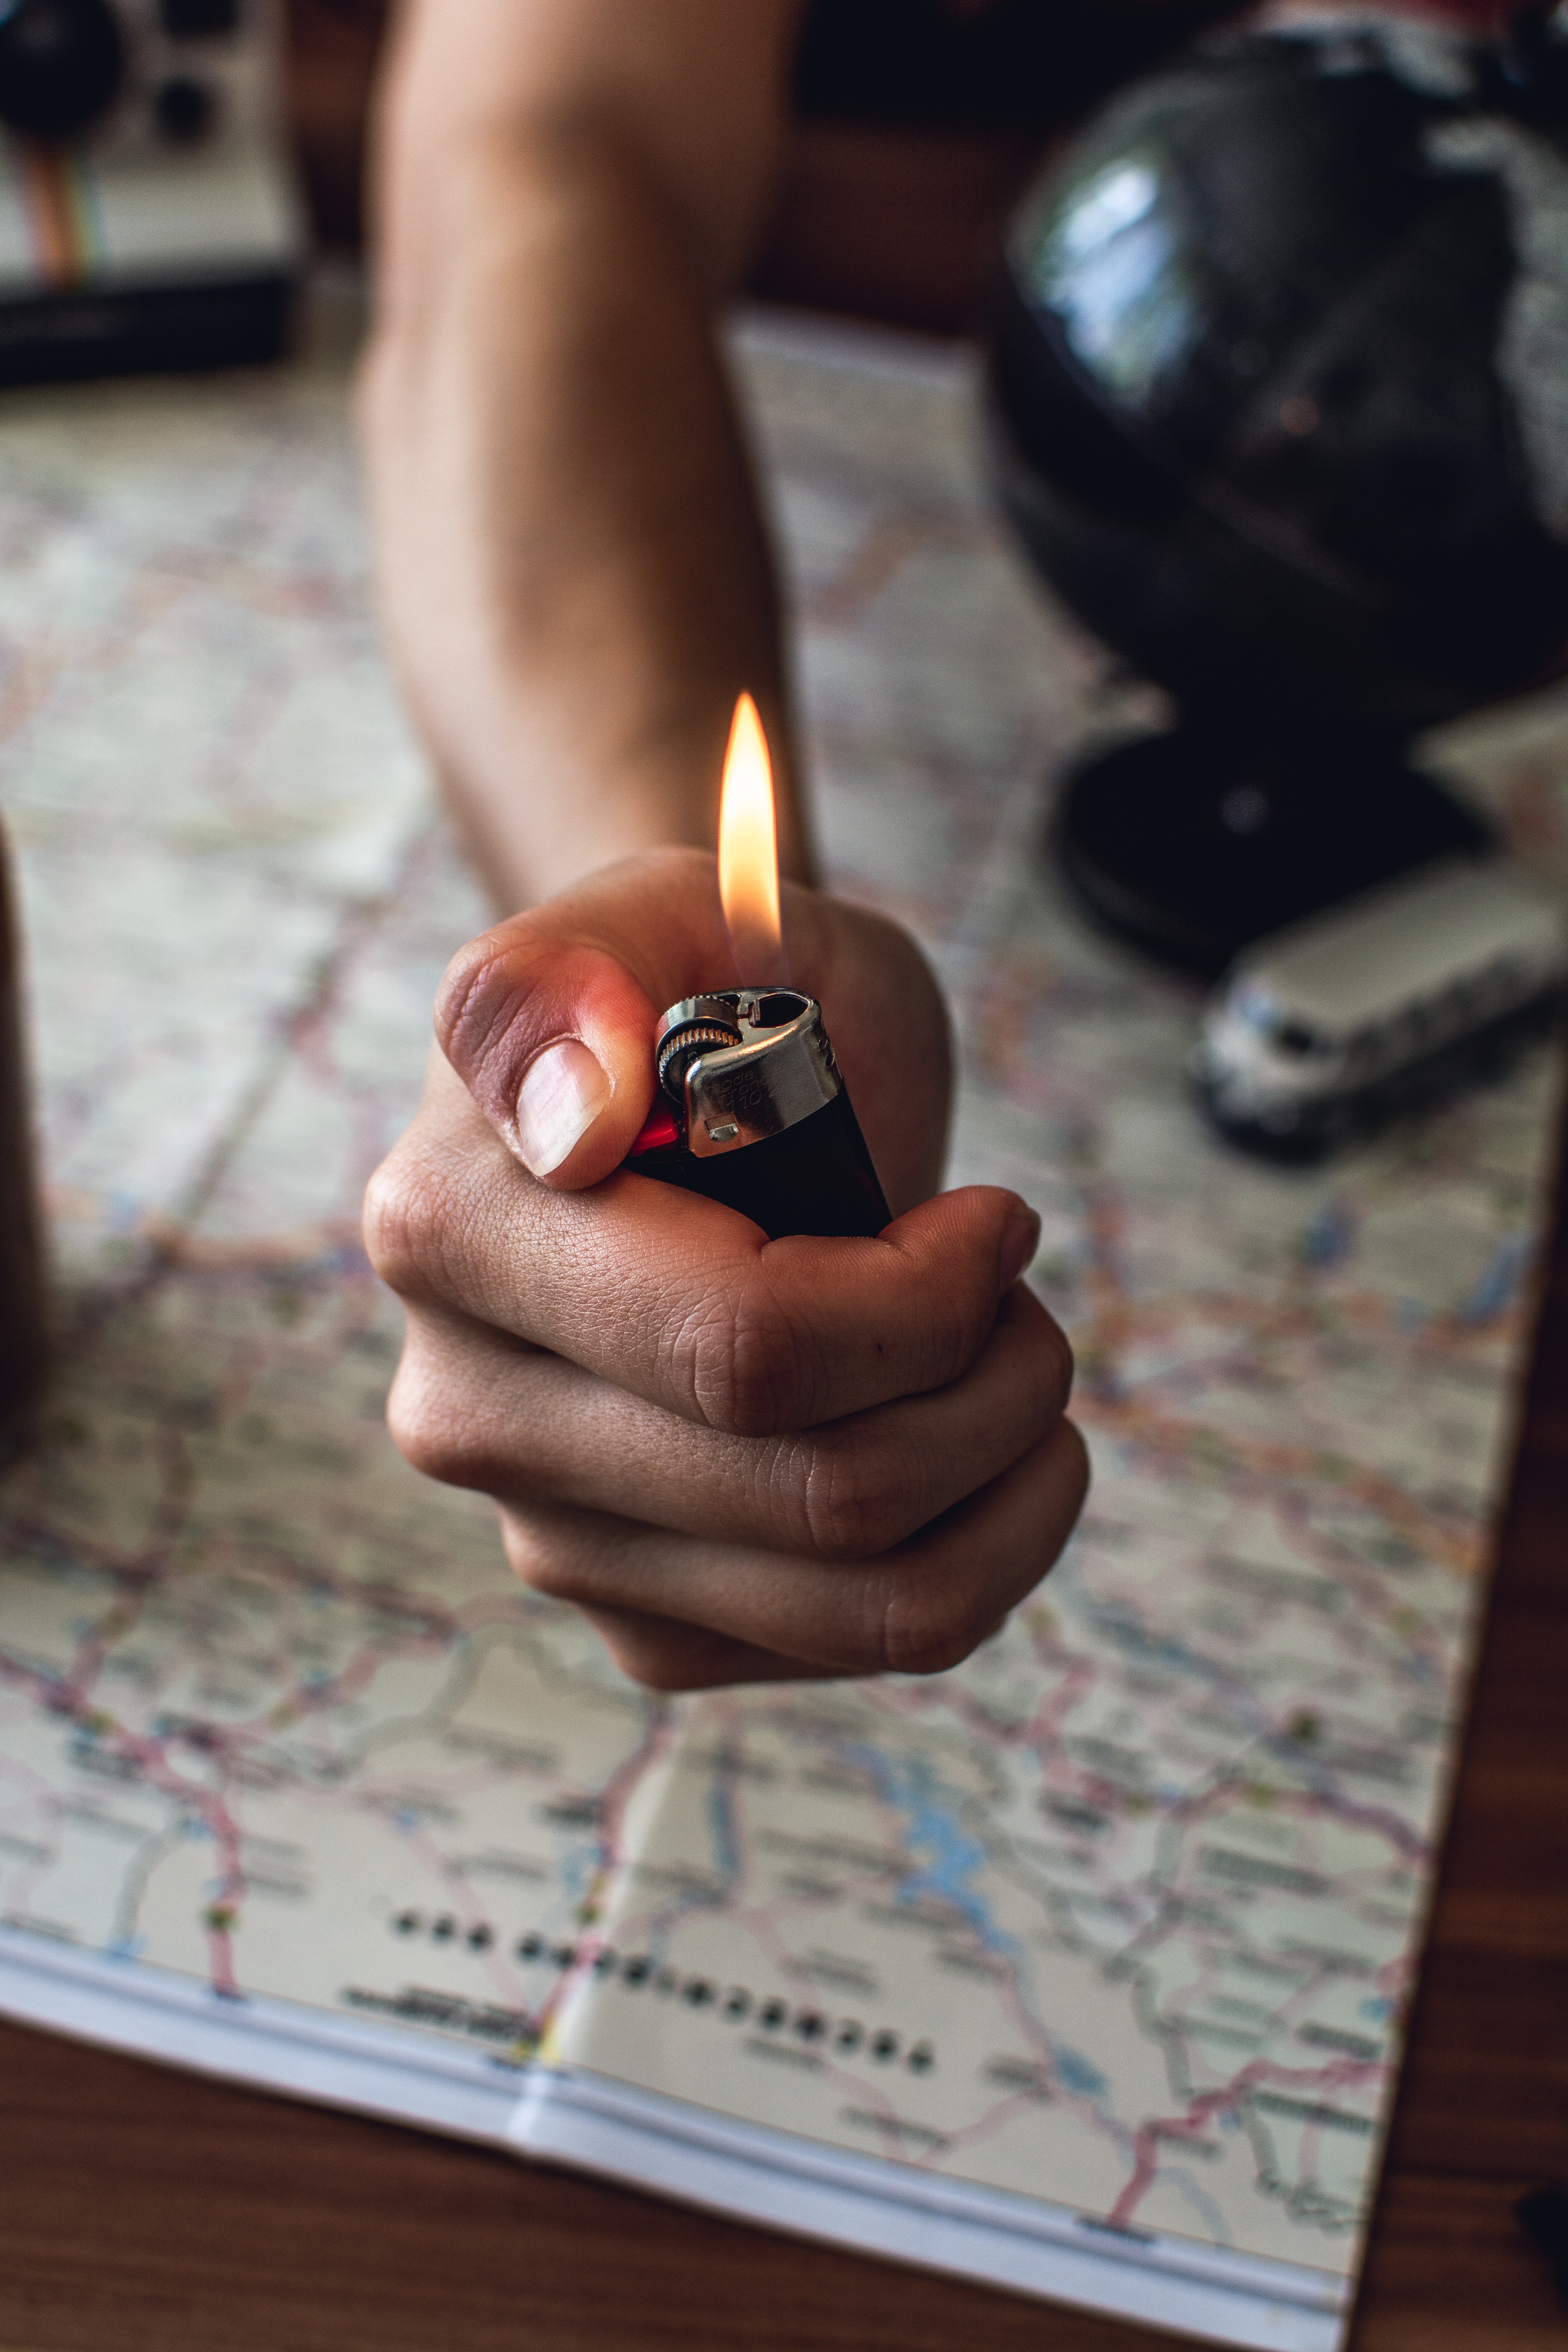 A person holding a lit lighter over a map and table globe